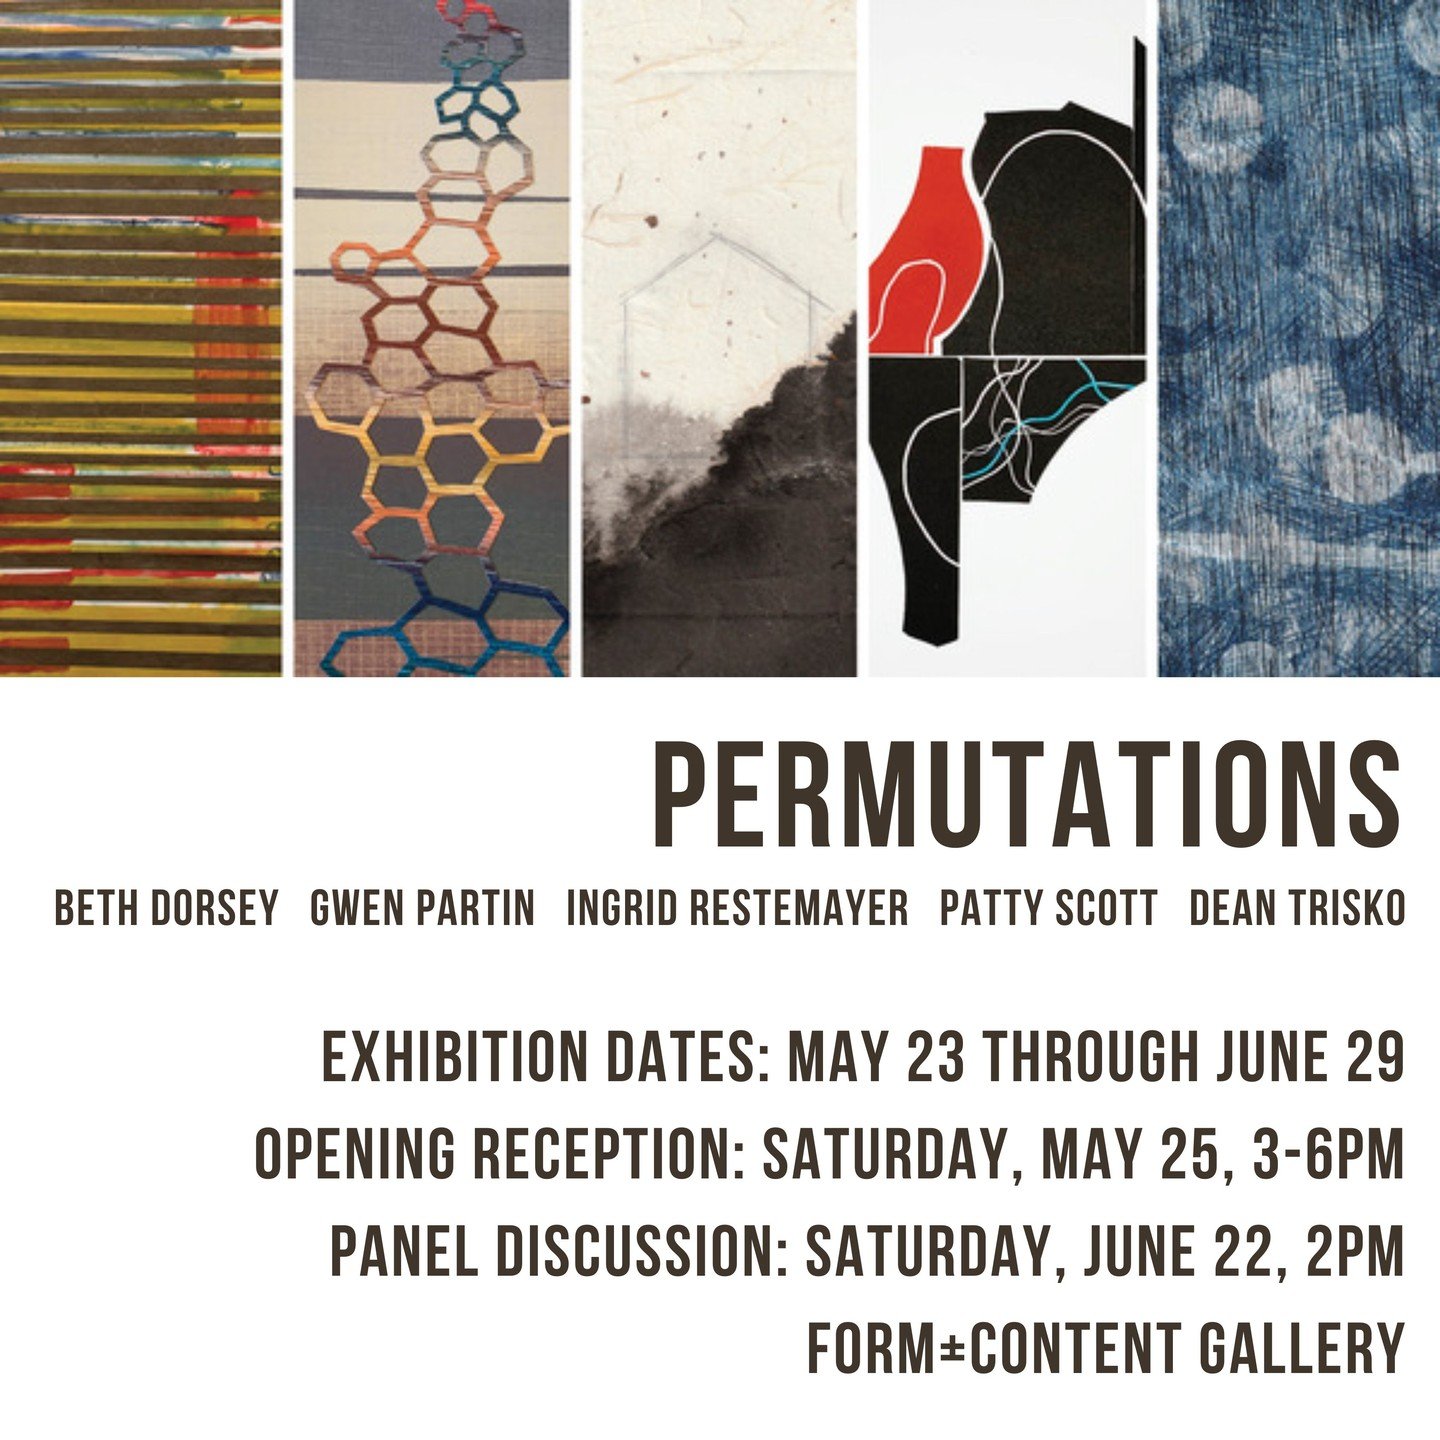 Up next!

Permutations: Hand pulled prints and mixed media artworks by Beth Dorsey, Gwen Partin, Ingrid Restemayer, Patty Scott, and Dean Trisko

Exhibition Dates
May 23 &ndash; June 29, 2024

Opening Reception
Saturday, May 25 18, 3-6pm 

Panel Disc